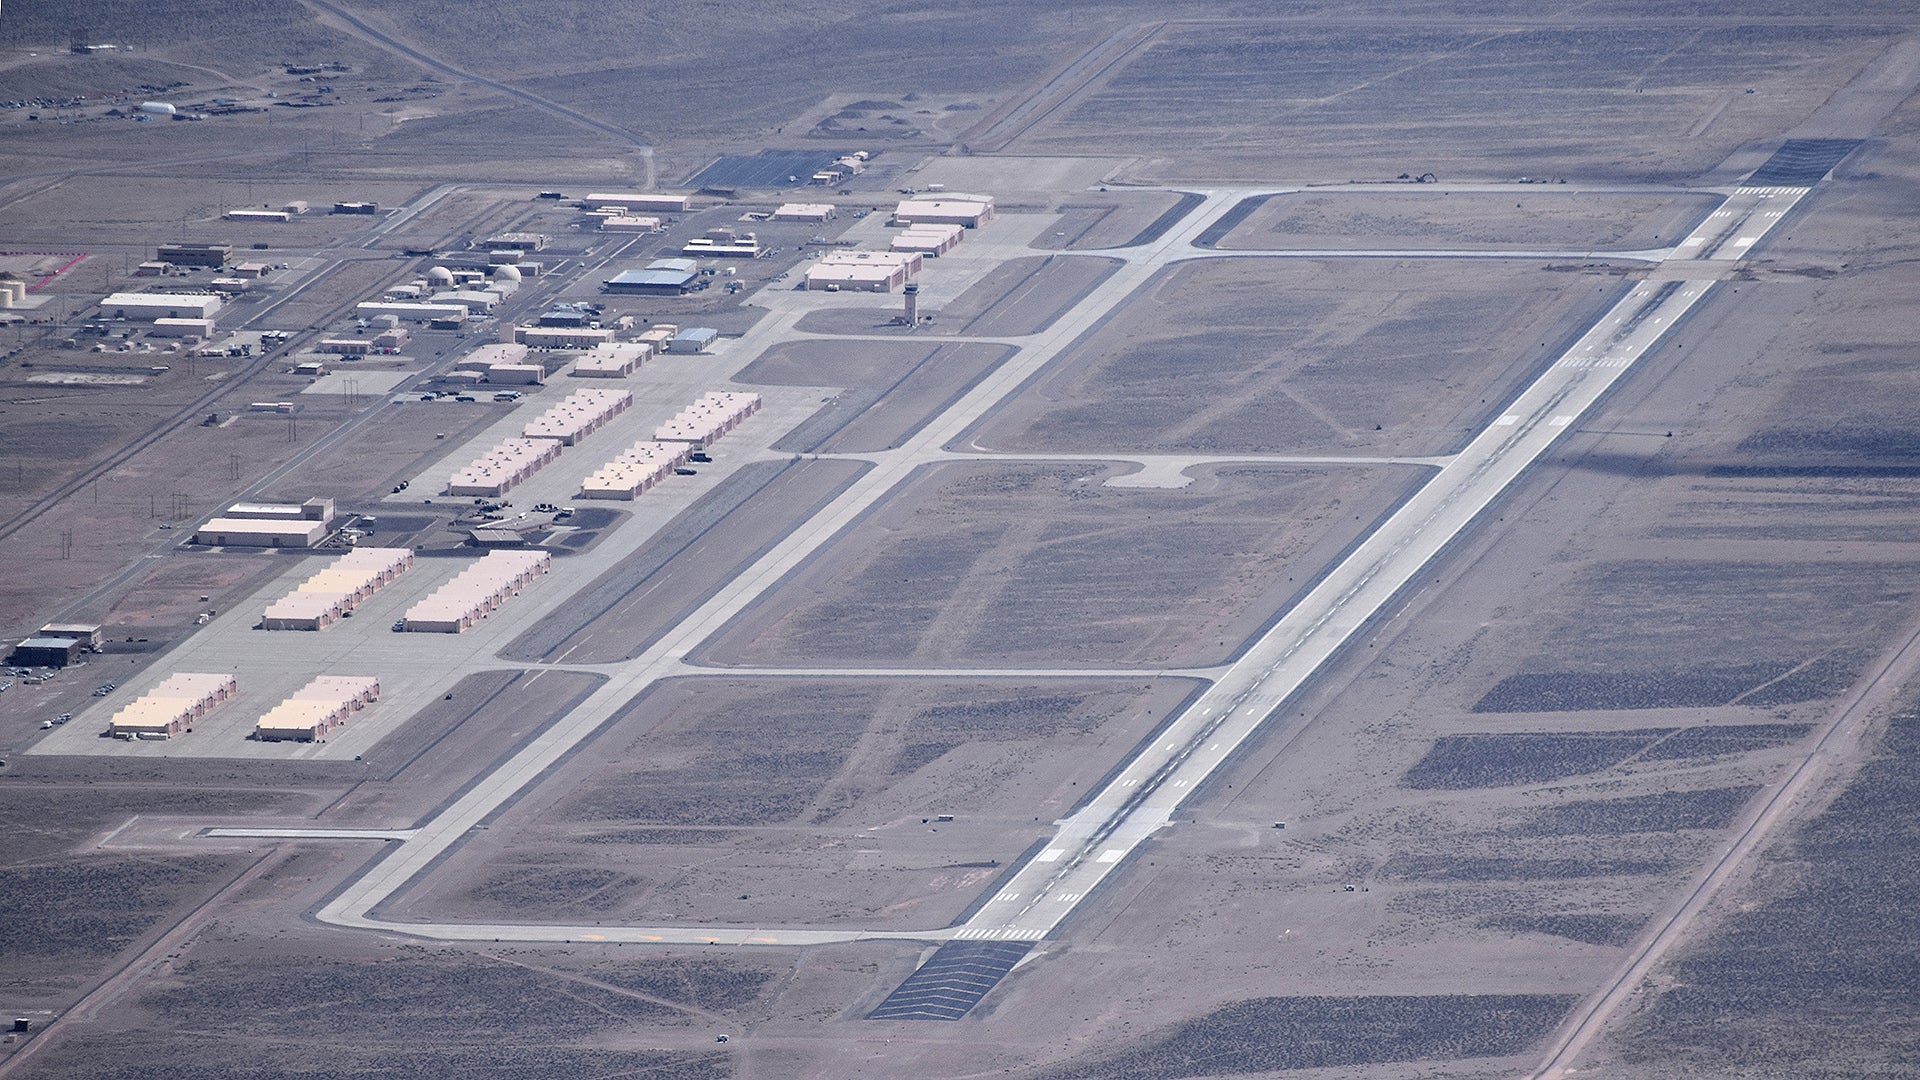 pilot-takes-amazing-images-of-area-51-and-tonopah-air-base-while